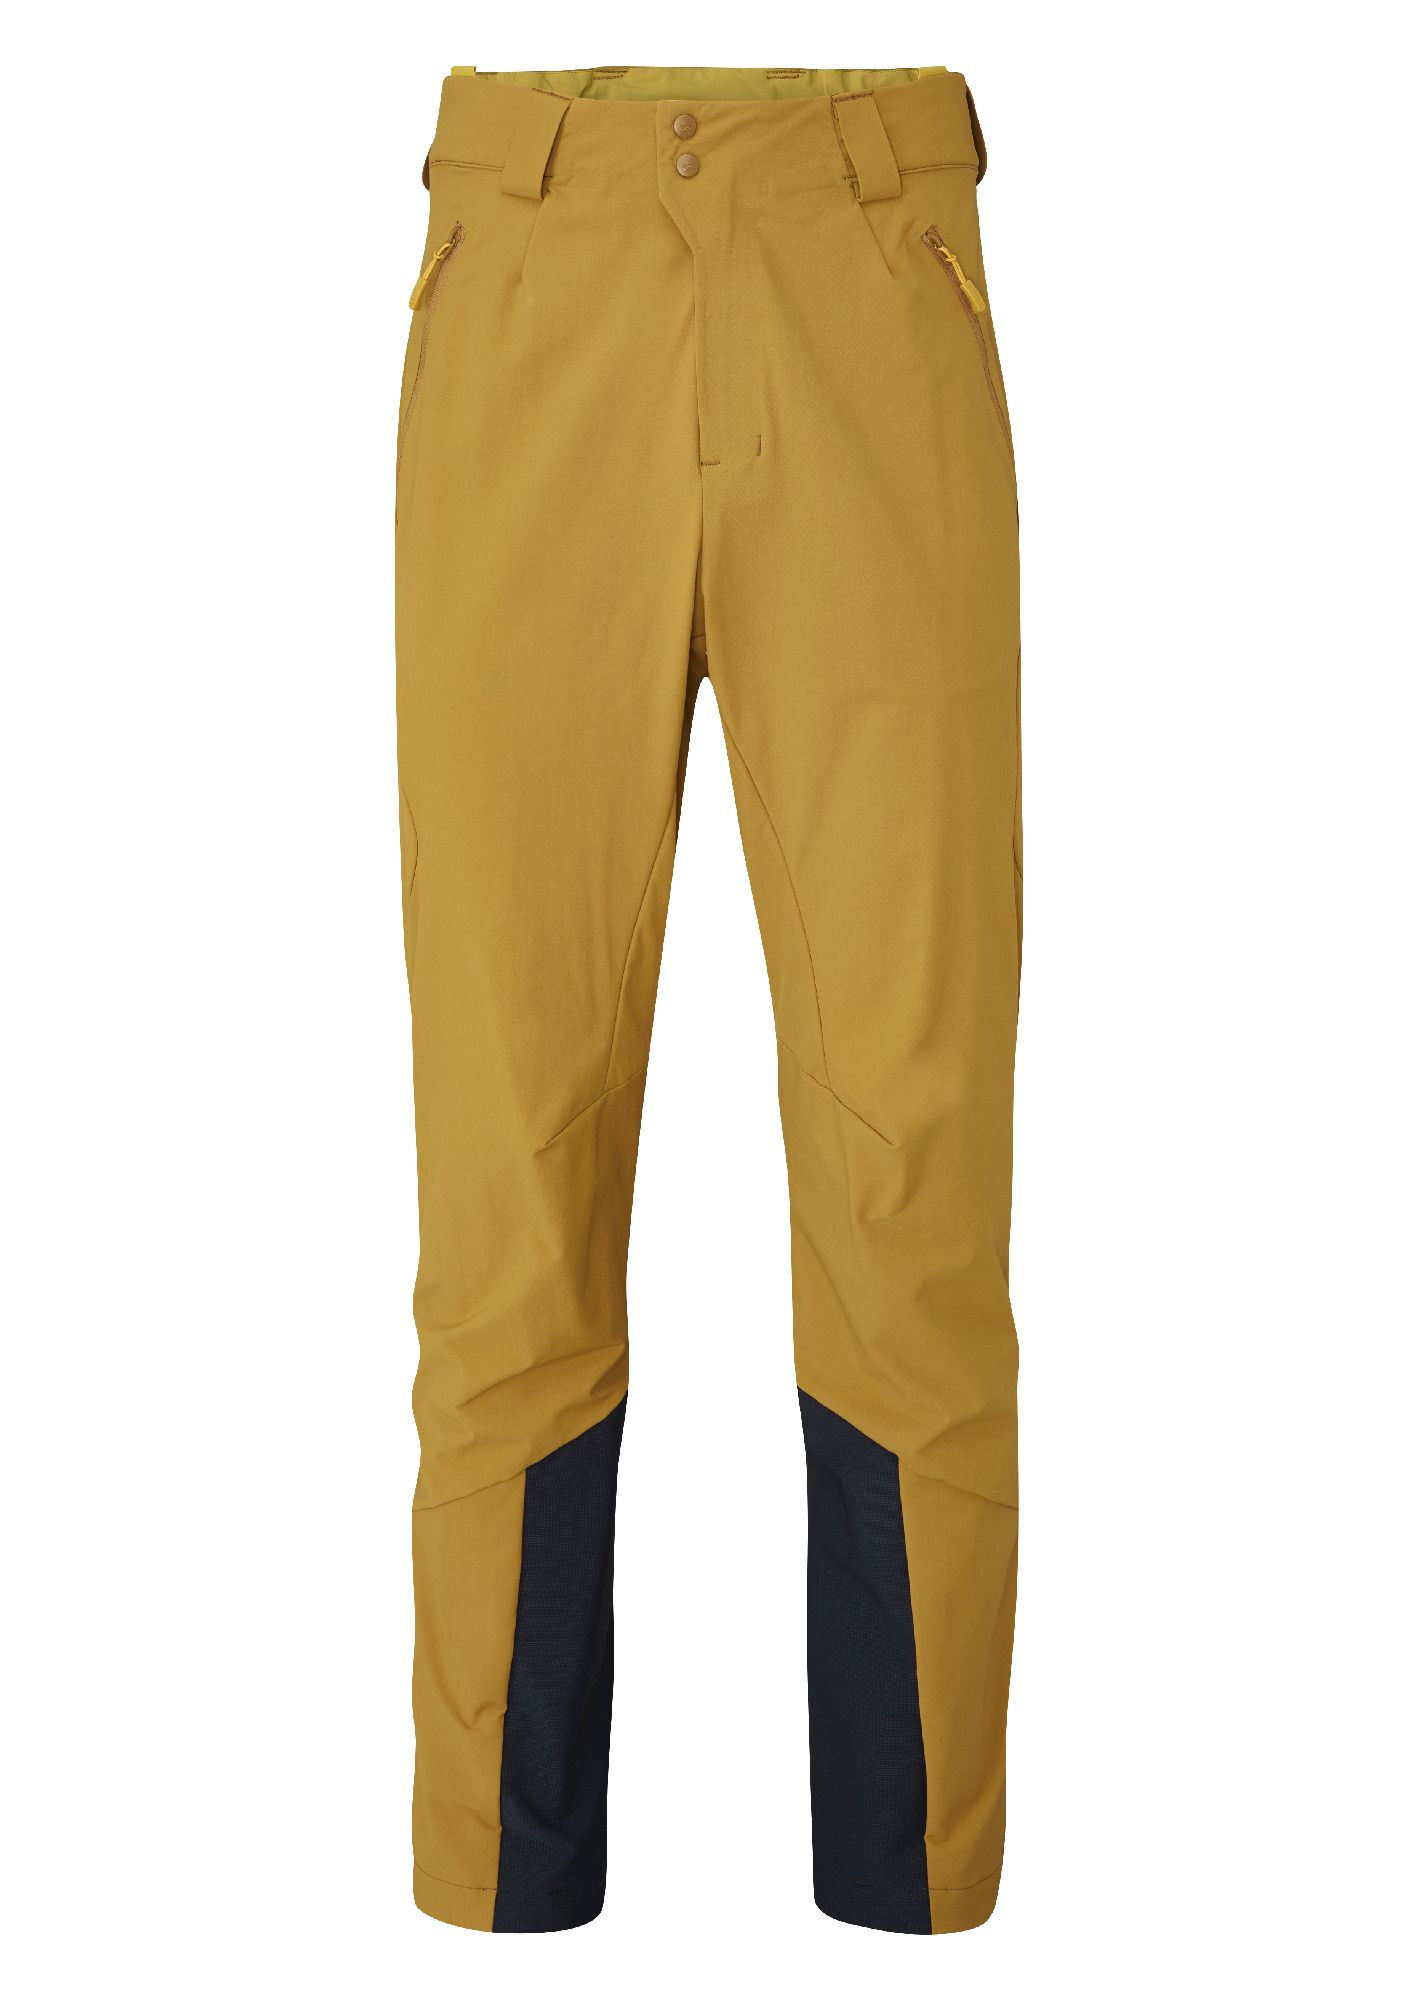 Rab Ascendor AS Pants - Mountaineering trousers - Men's